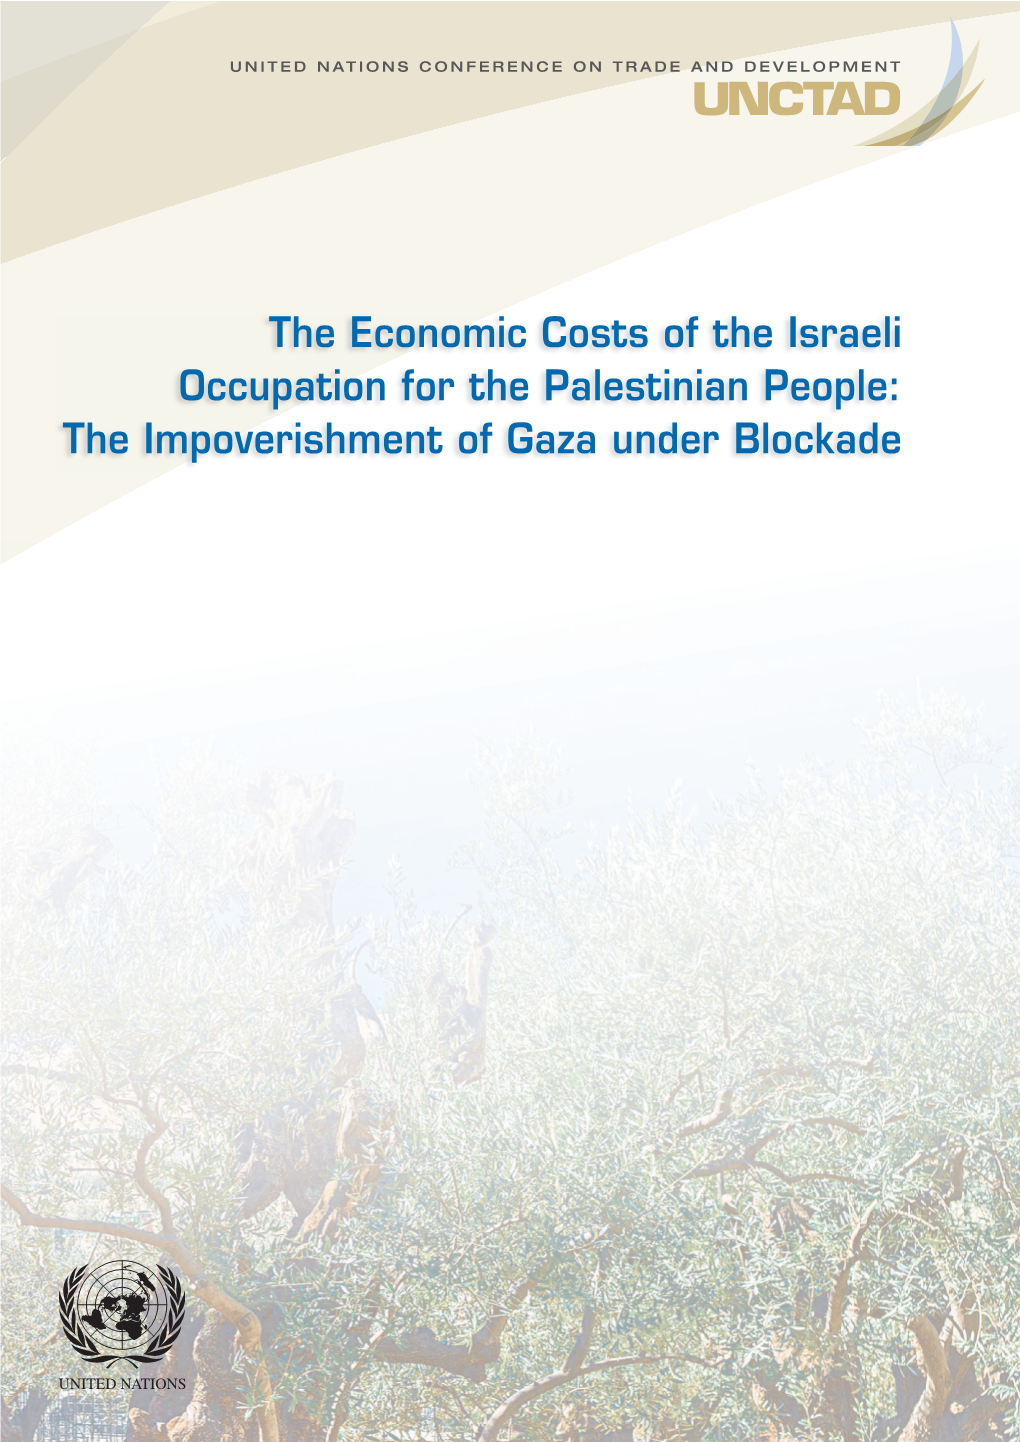 The Economic Costs of the Israeli Occupation for the Palestinian People: the Impoverishment of Gaza Under Blockade